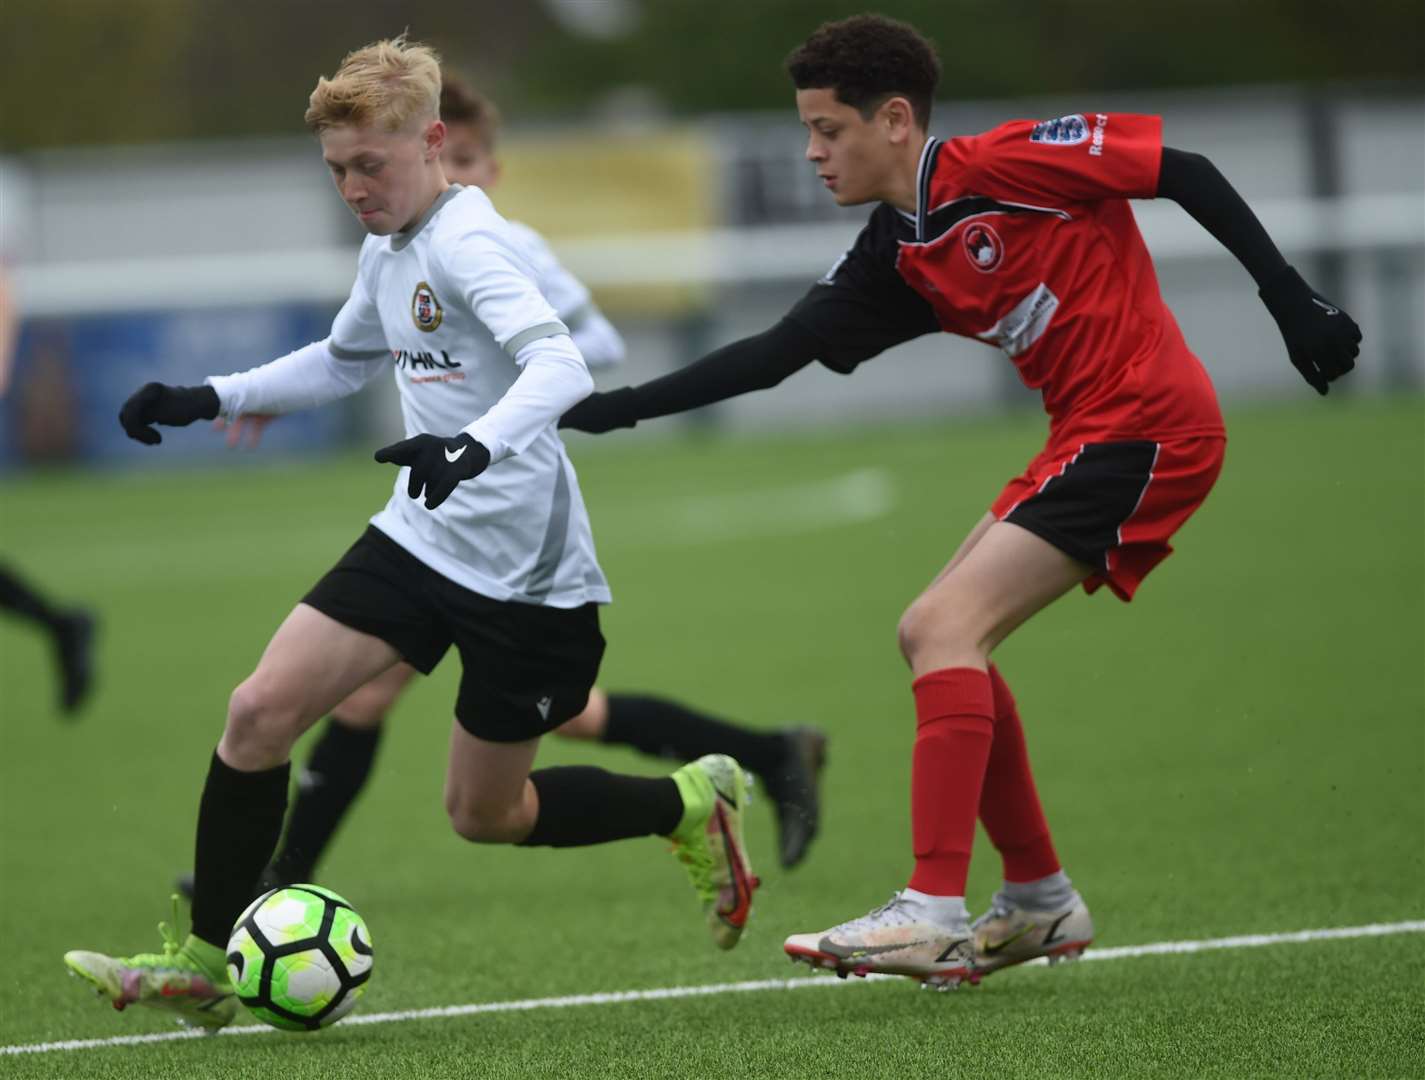 Bromley under-13s (white) are closed down by Phoenix Sports under-13s. Picture: PSP Images